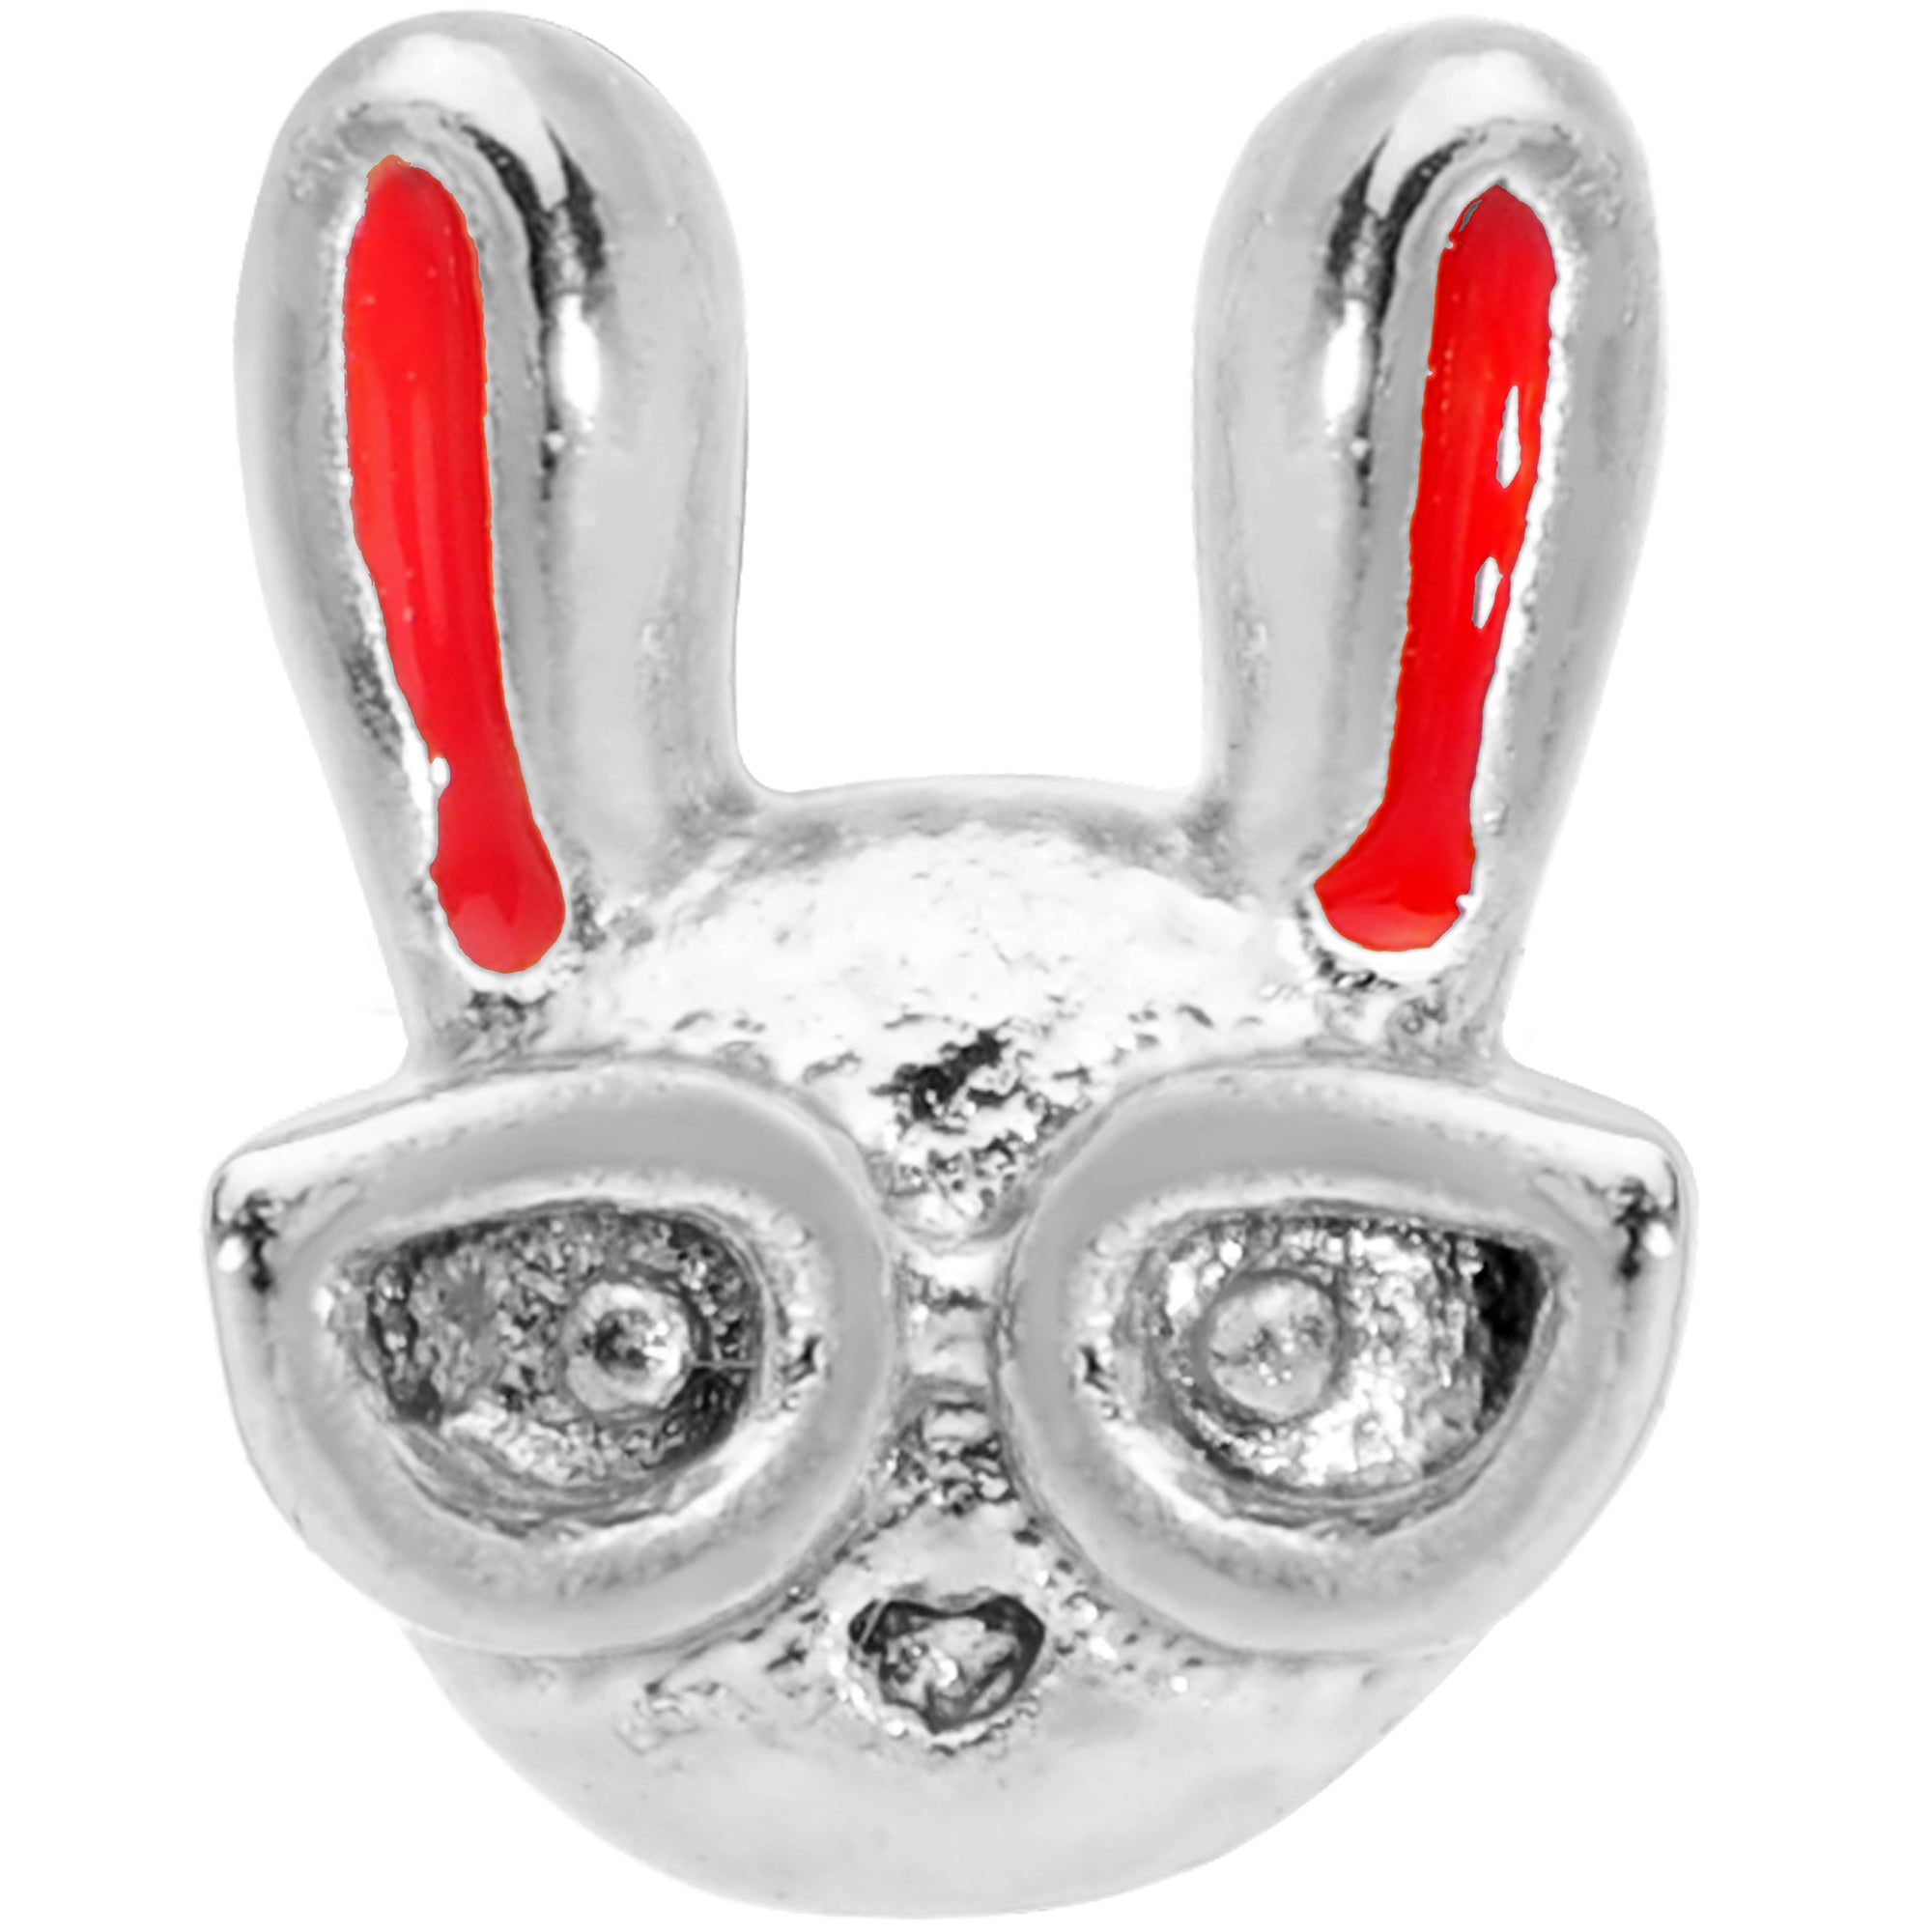 20 Gauge 5/16 Pink Ears Nerdy Easter Bunny L Shaped Nose Ring